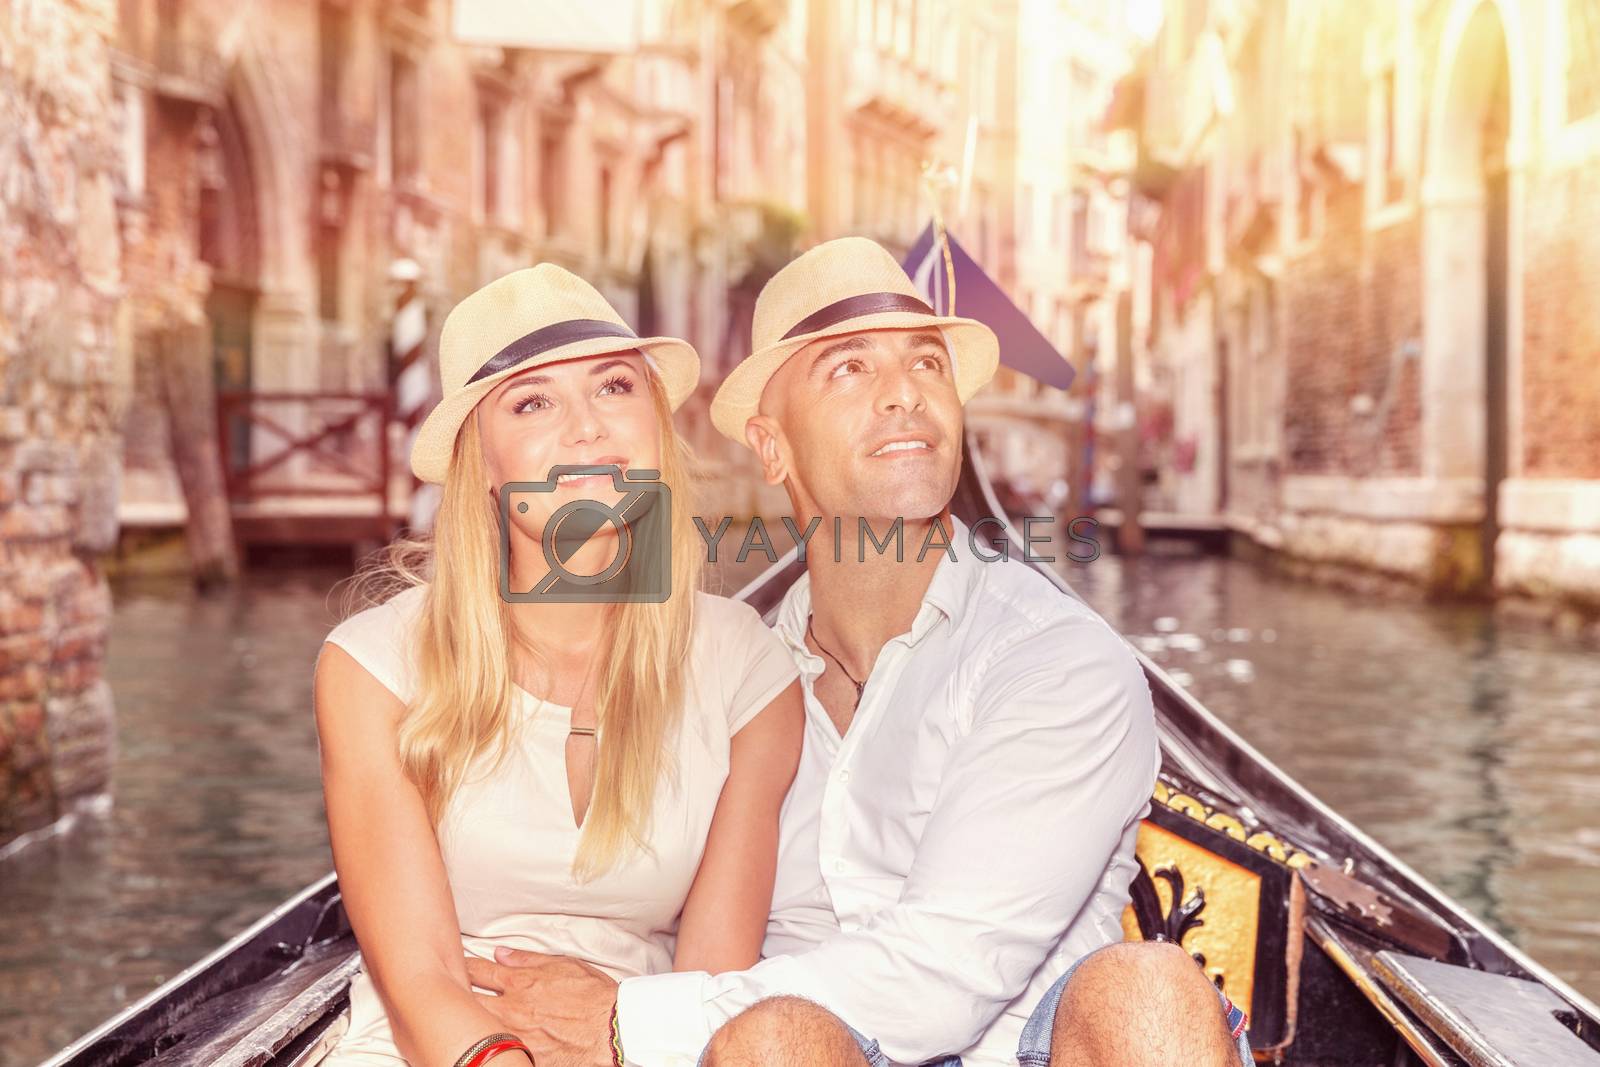 Royalty free image of Romantic travel to Europe by Anna_Omelchenko